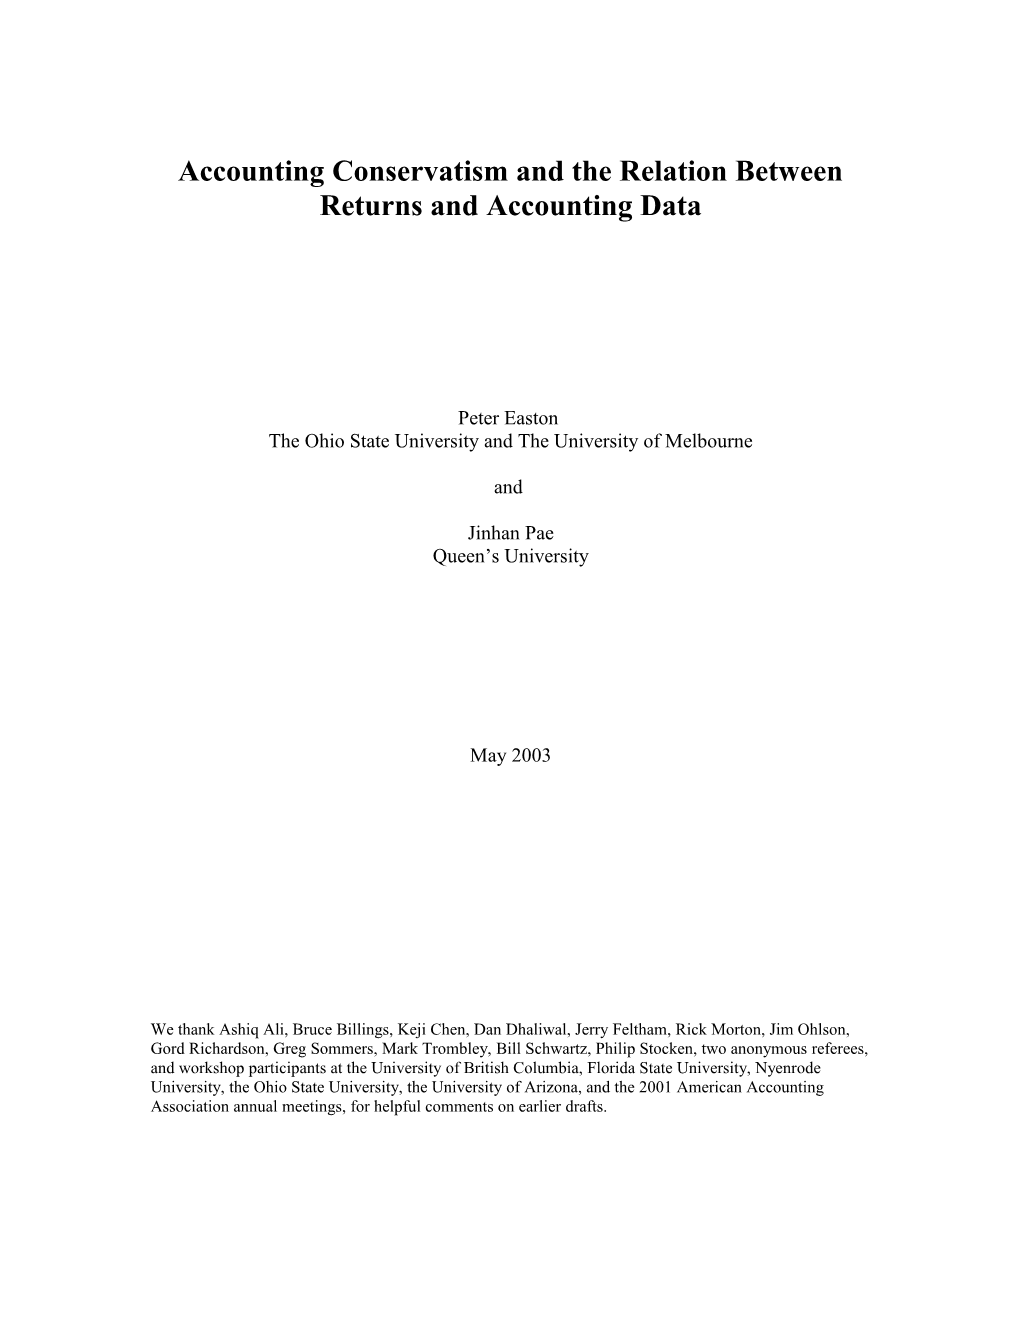 Accounting Conservatism and the Relation Between Returns and Accounting Data